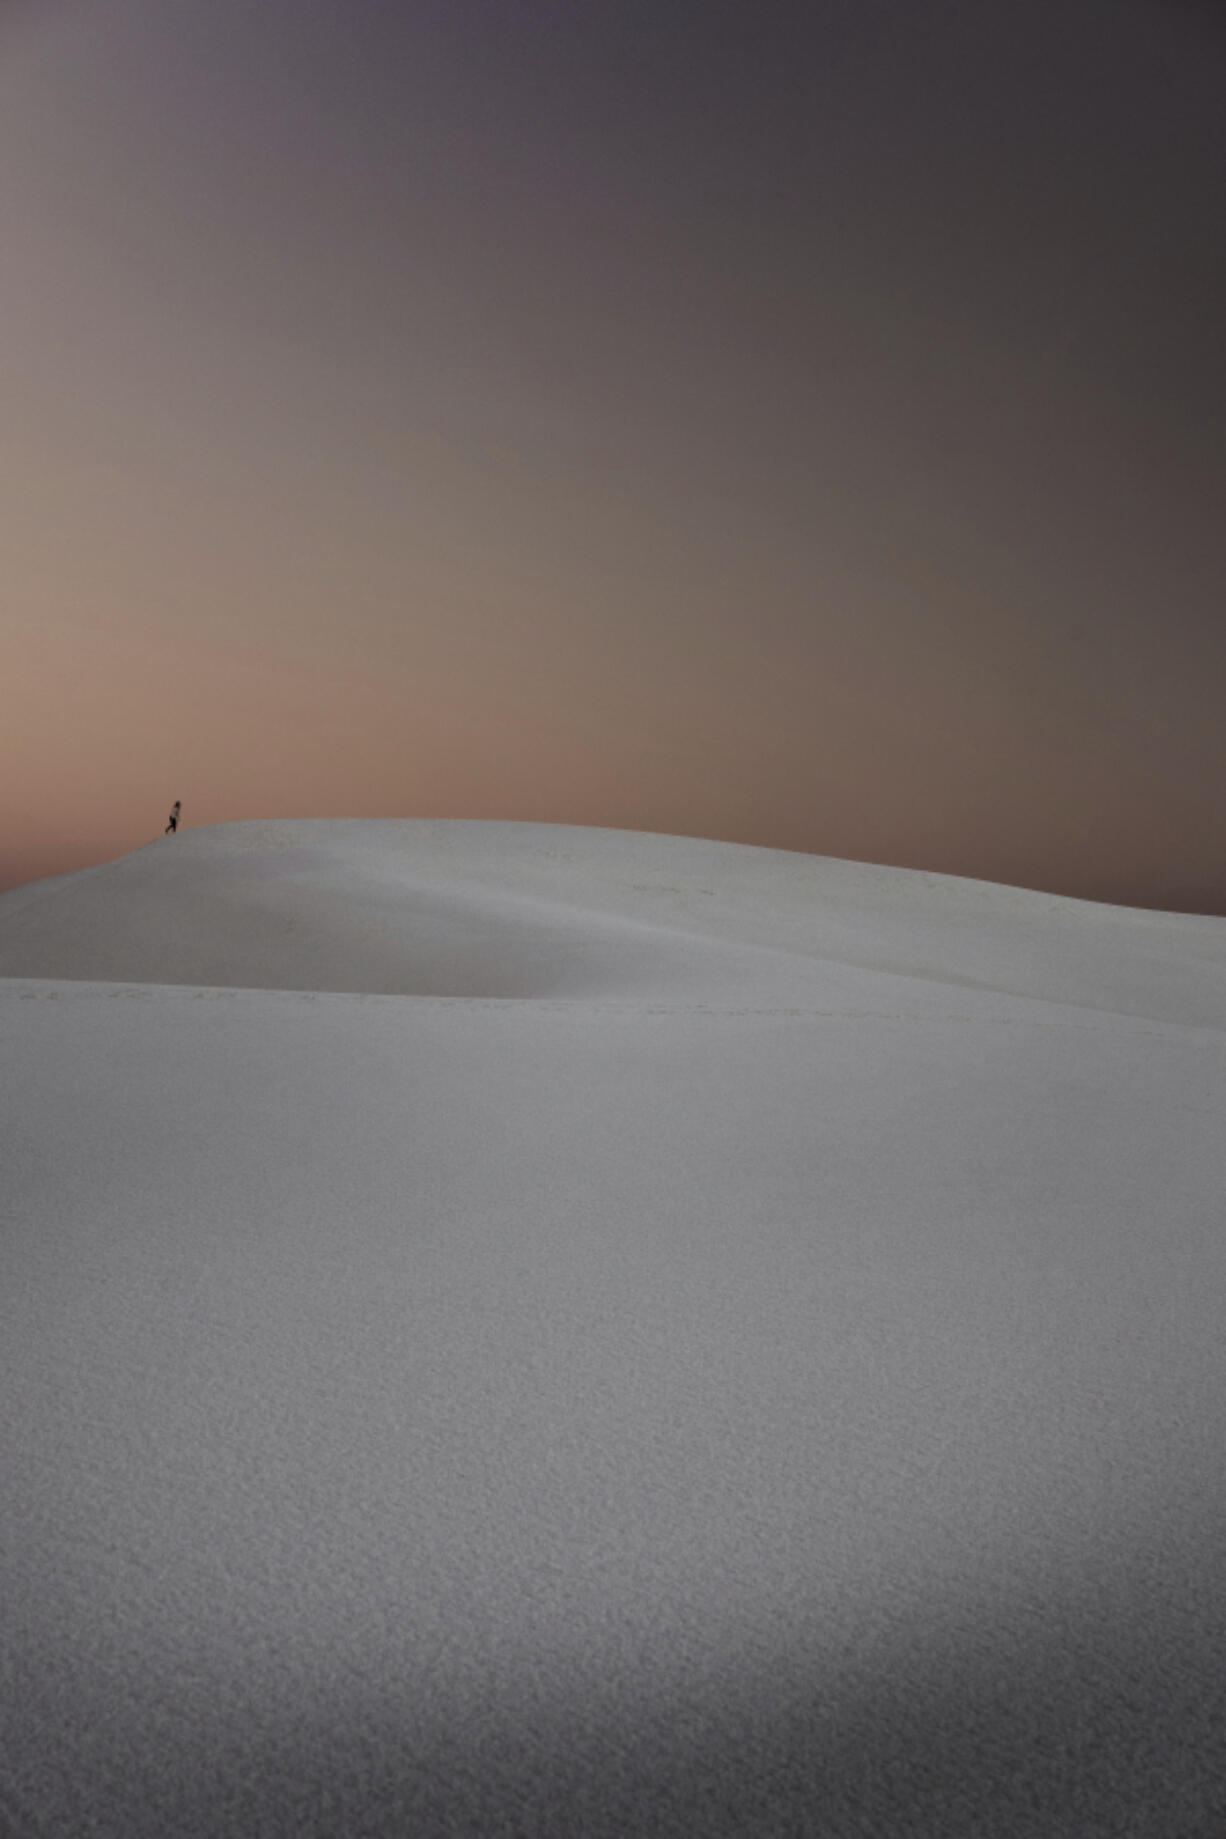 This photo shows the White Sands National Park in New Mexico. &ldquo;Transformative travel&rsquo;s a trend we&rsquo;re tracking for growth,&rdquo; says Alex Hawkins, editor at the foresight consultancy The Future Laboratory. &ldquo;It taps into consumers&rsquo; desire for self-reflective tourism experiences.&rdquo;. (Black Tomato via AP).